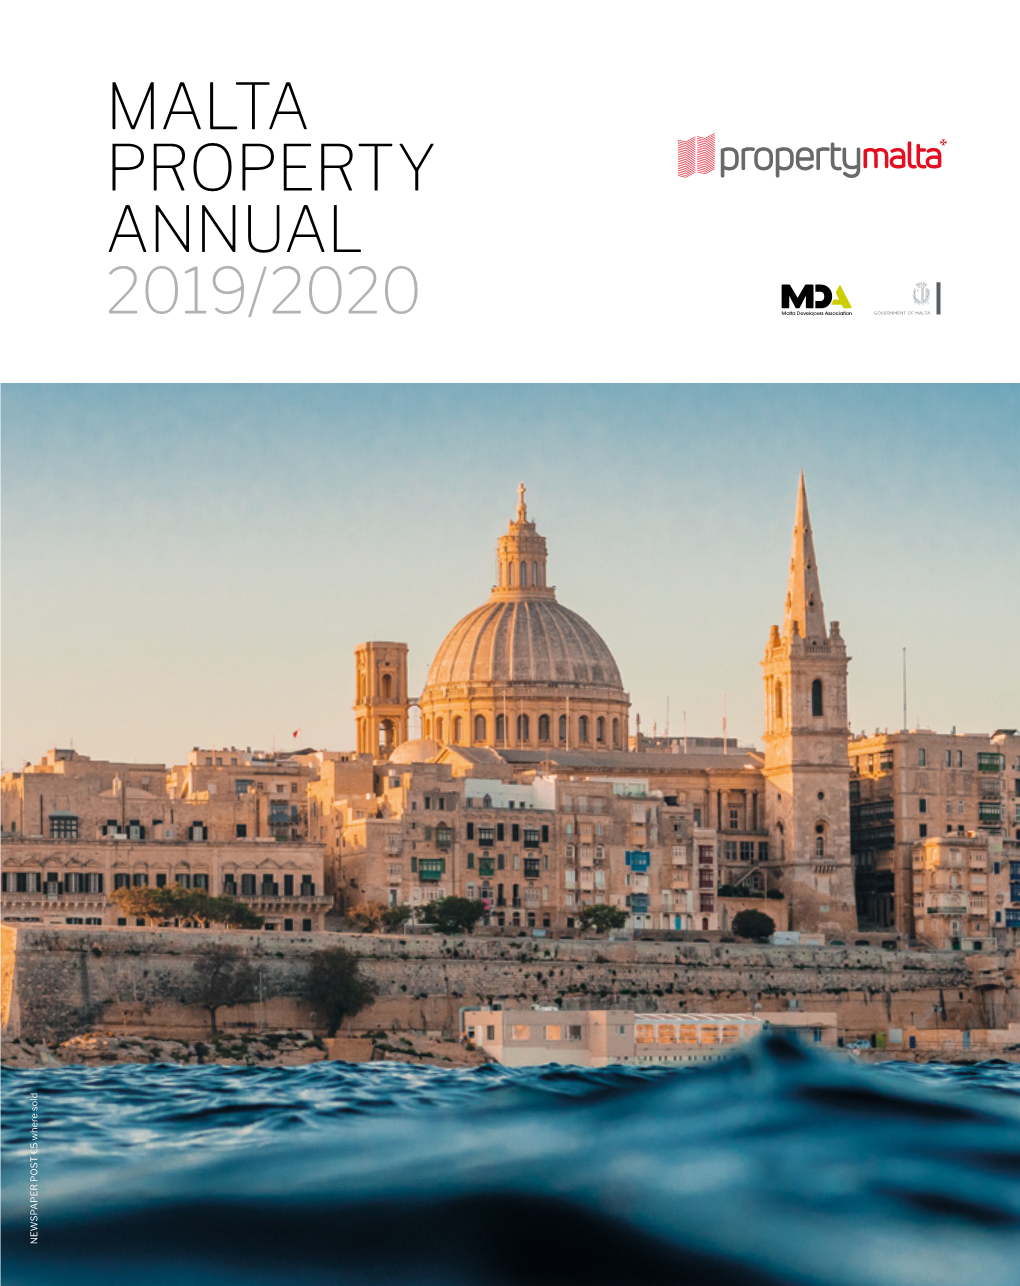 MALTA PROPERTY ANNUAL 2019/2020 NEWSPAPER POST €5 Where Sold POST €5 Where NEWSPAPER CONTENTS